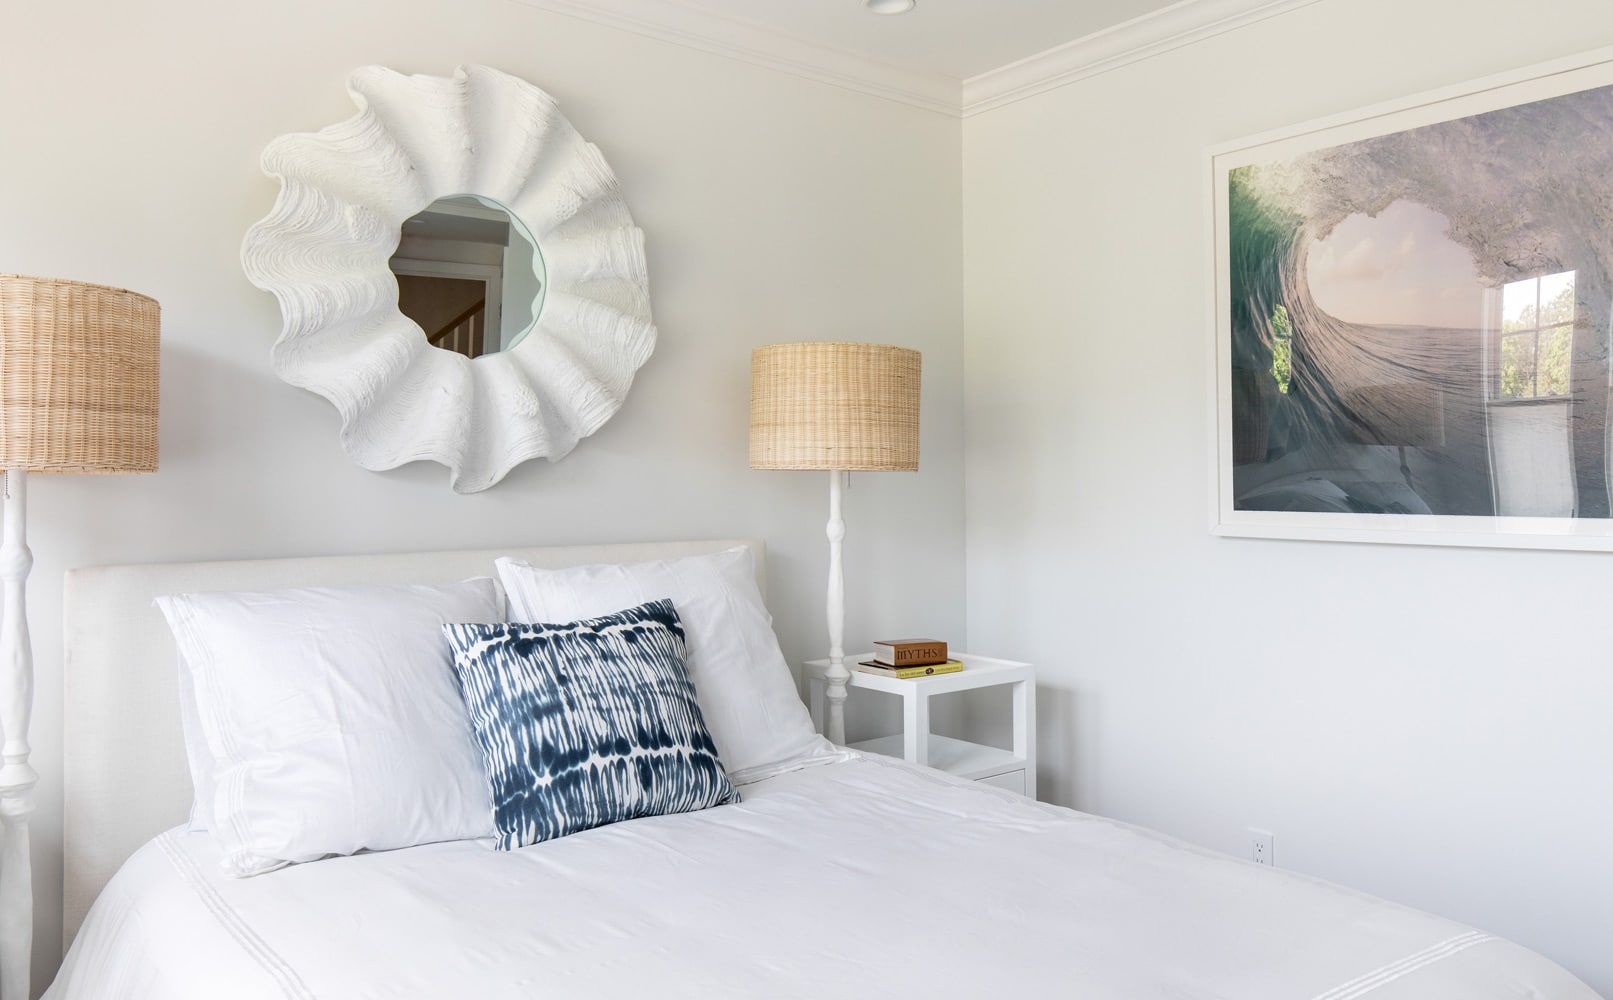 Bedroom interiors designed by Annette Jaffe Interiors in a Hamptons boathouse